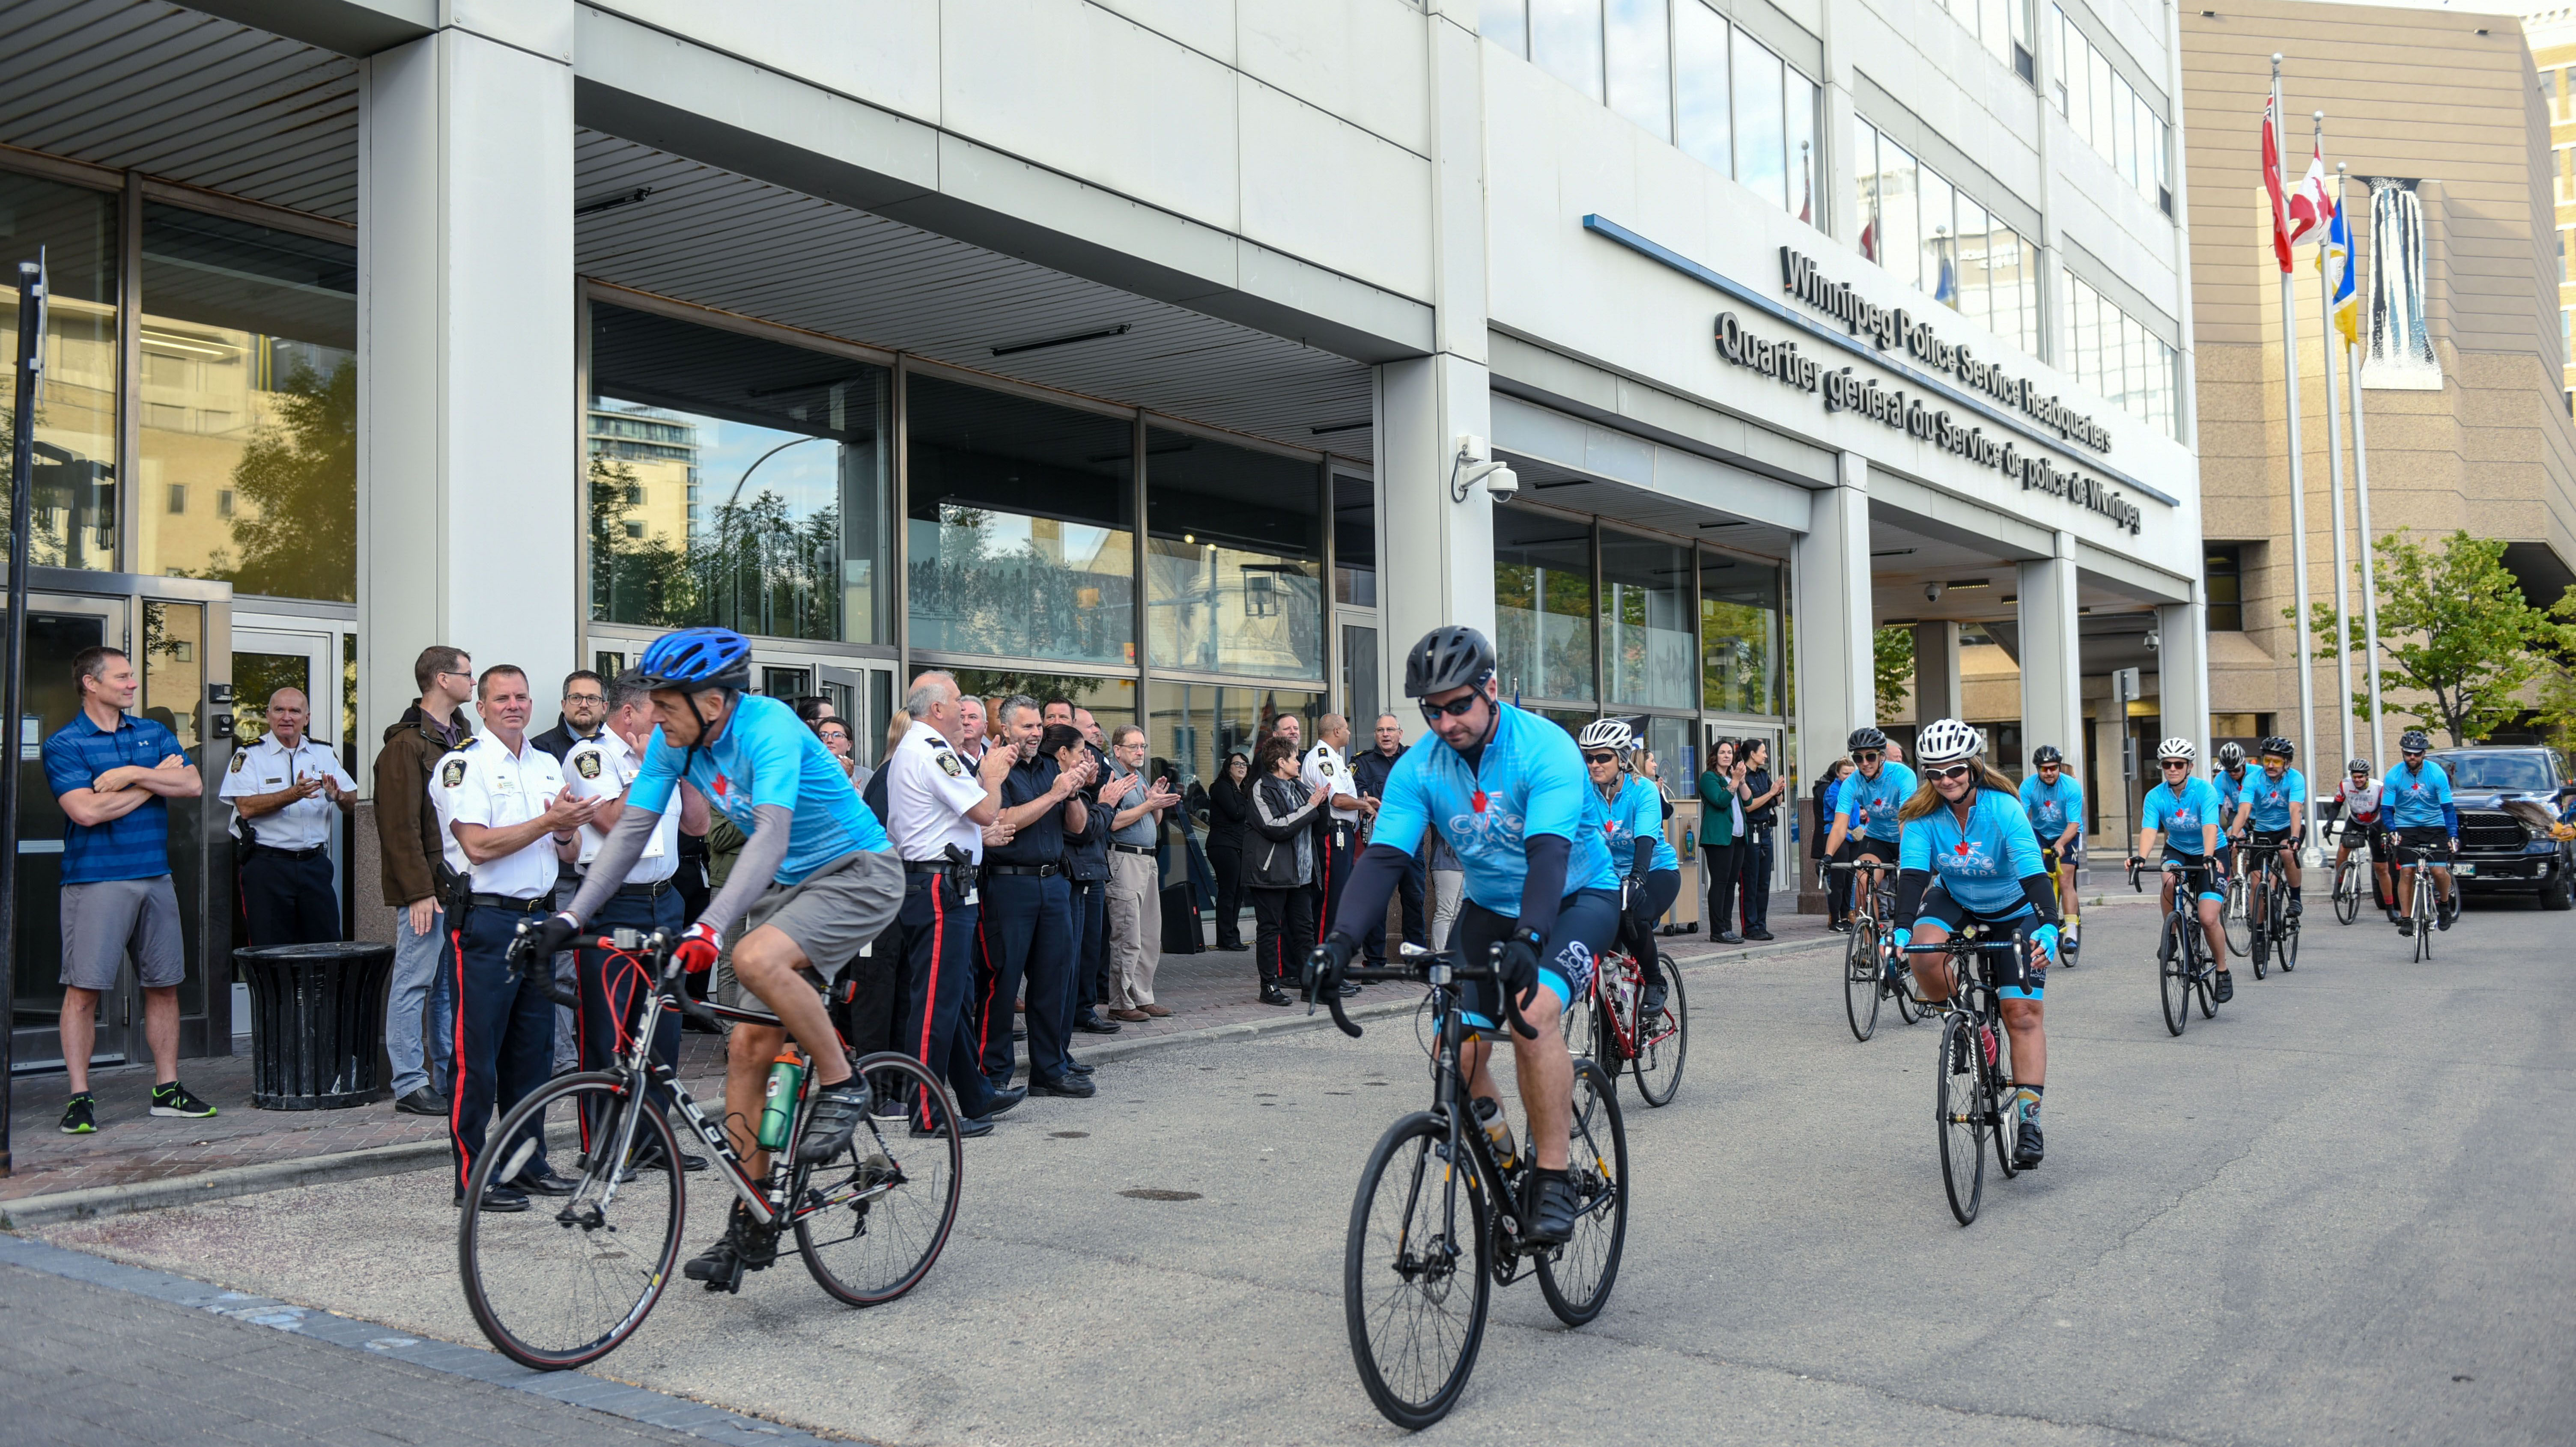 A team of people on bicycles wearing blue shirts cycle past a group of police officers.